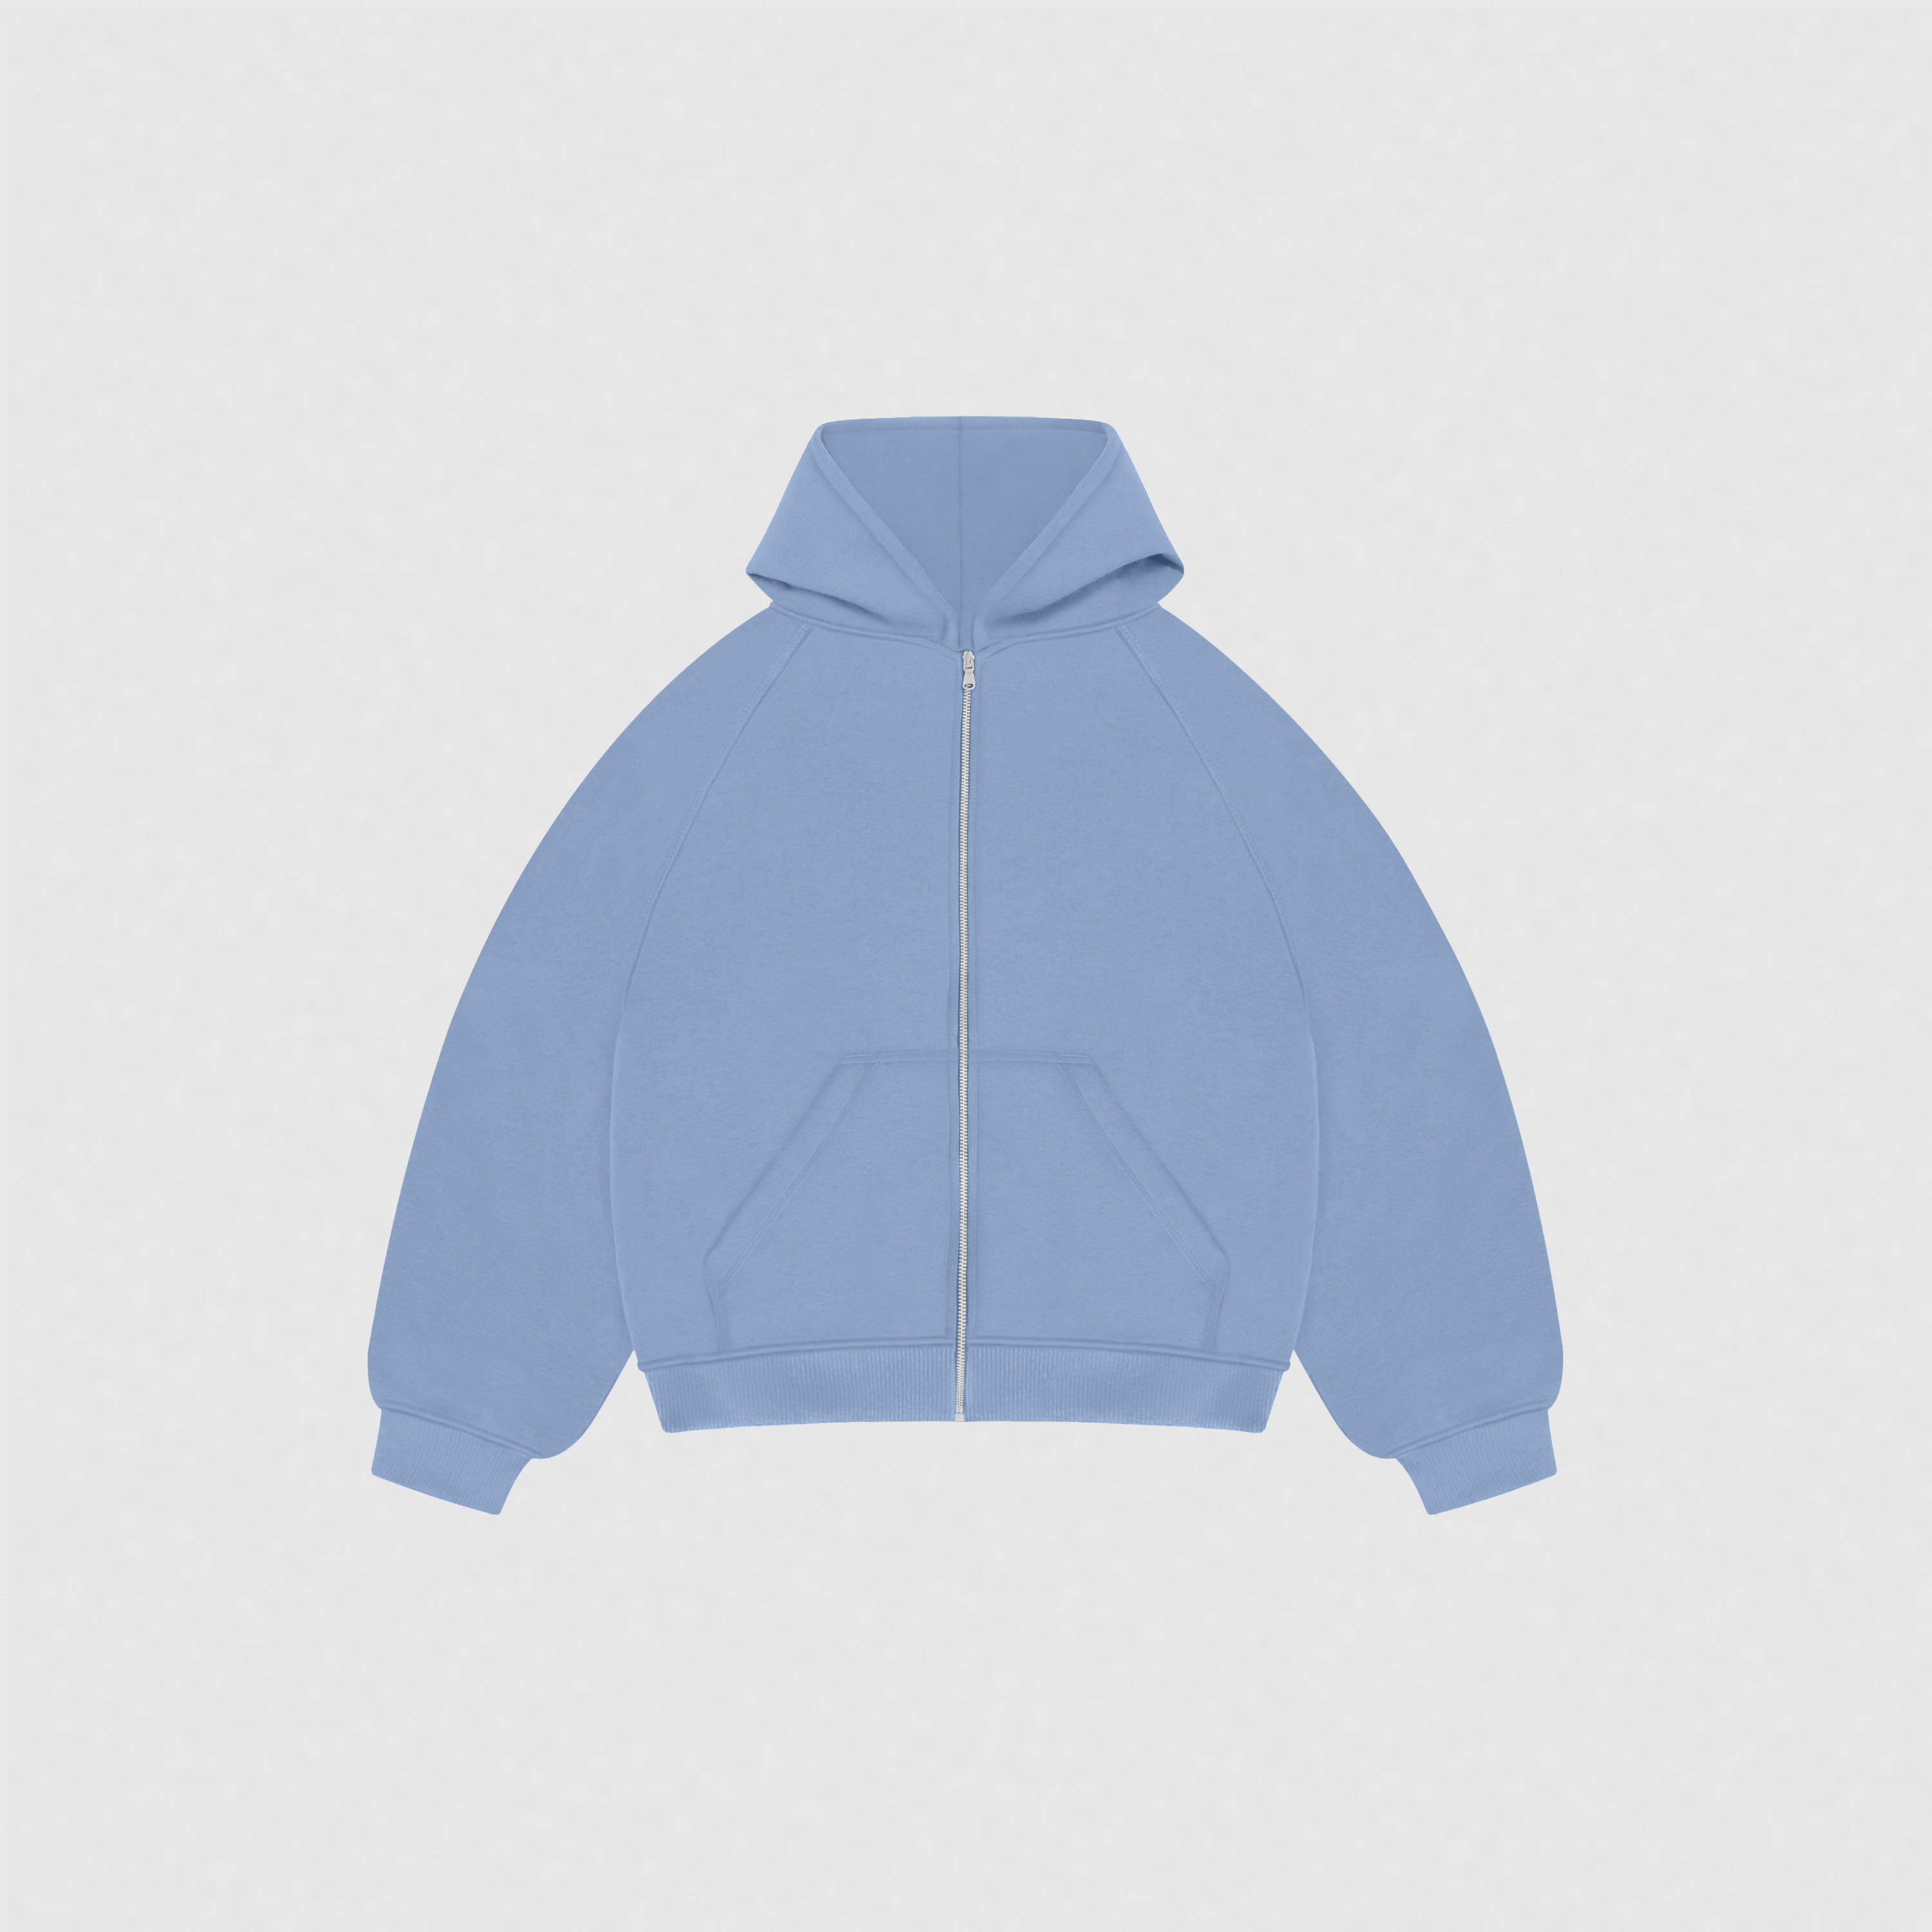 EVERYDAY CLOUDY BLUE ZIP HOODIE-Hoodie-Lomalab-2X-SMALL-Light blue-Lomalab